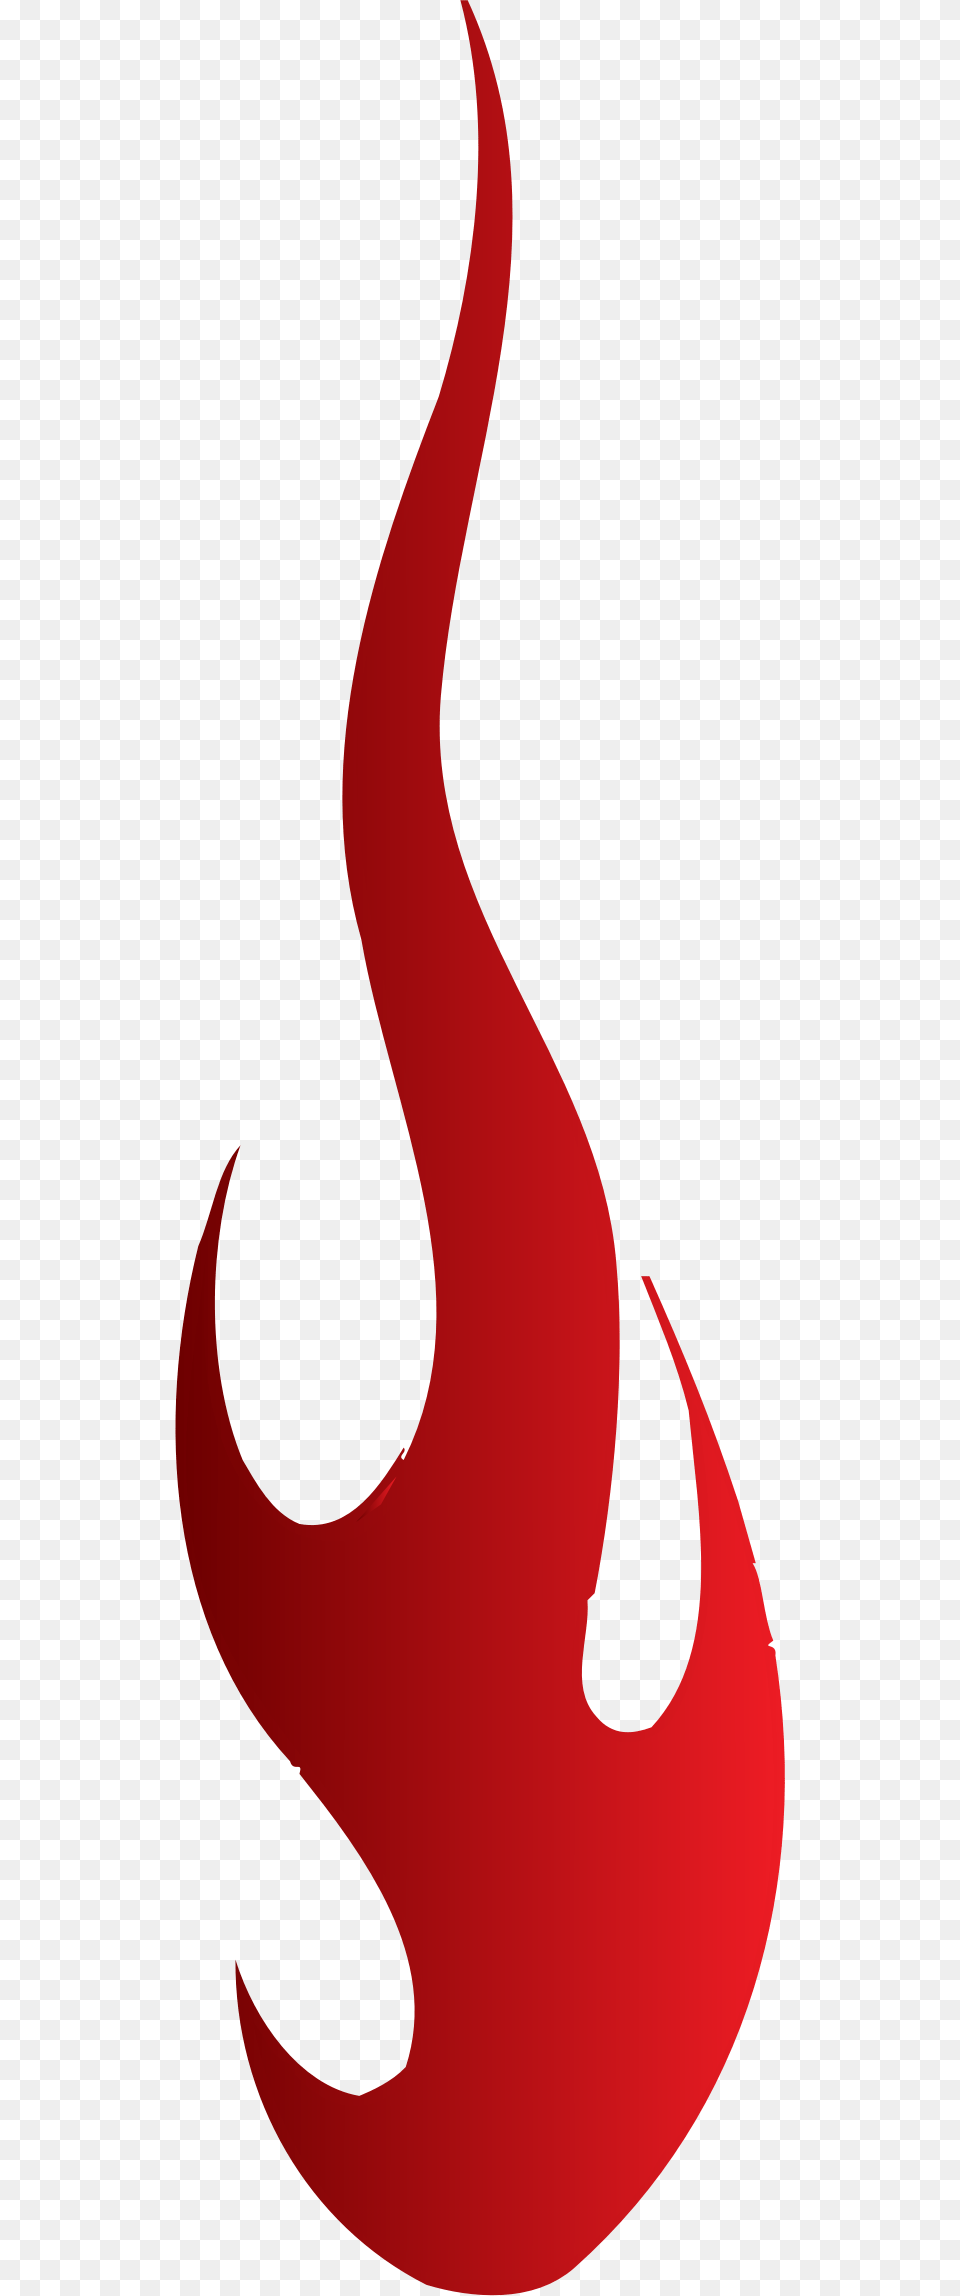 This Icons Design Of Raseone Flame Png Image